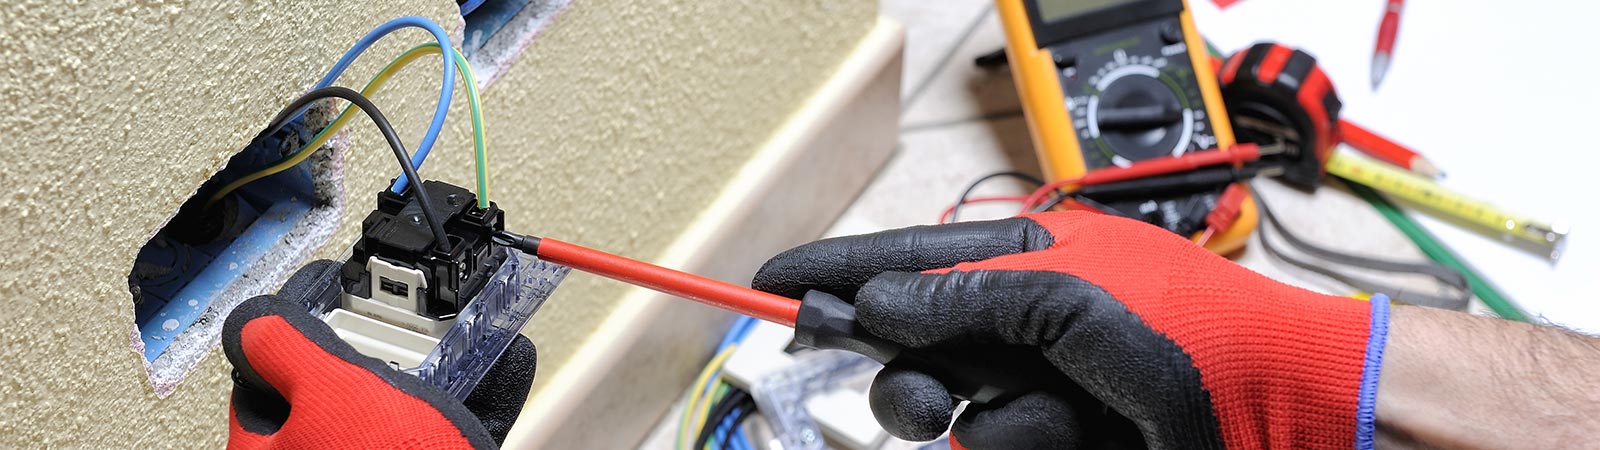 Electrical Diagnosis Performed on Residential Outlet